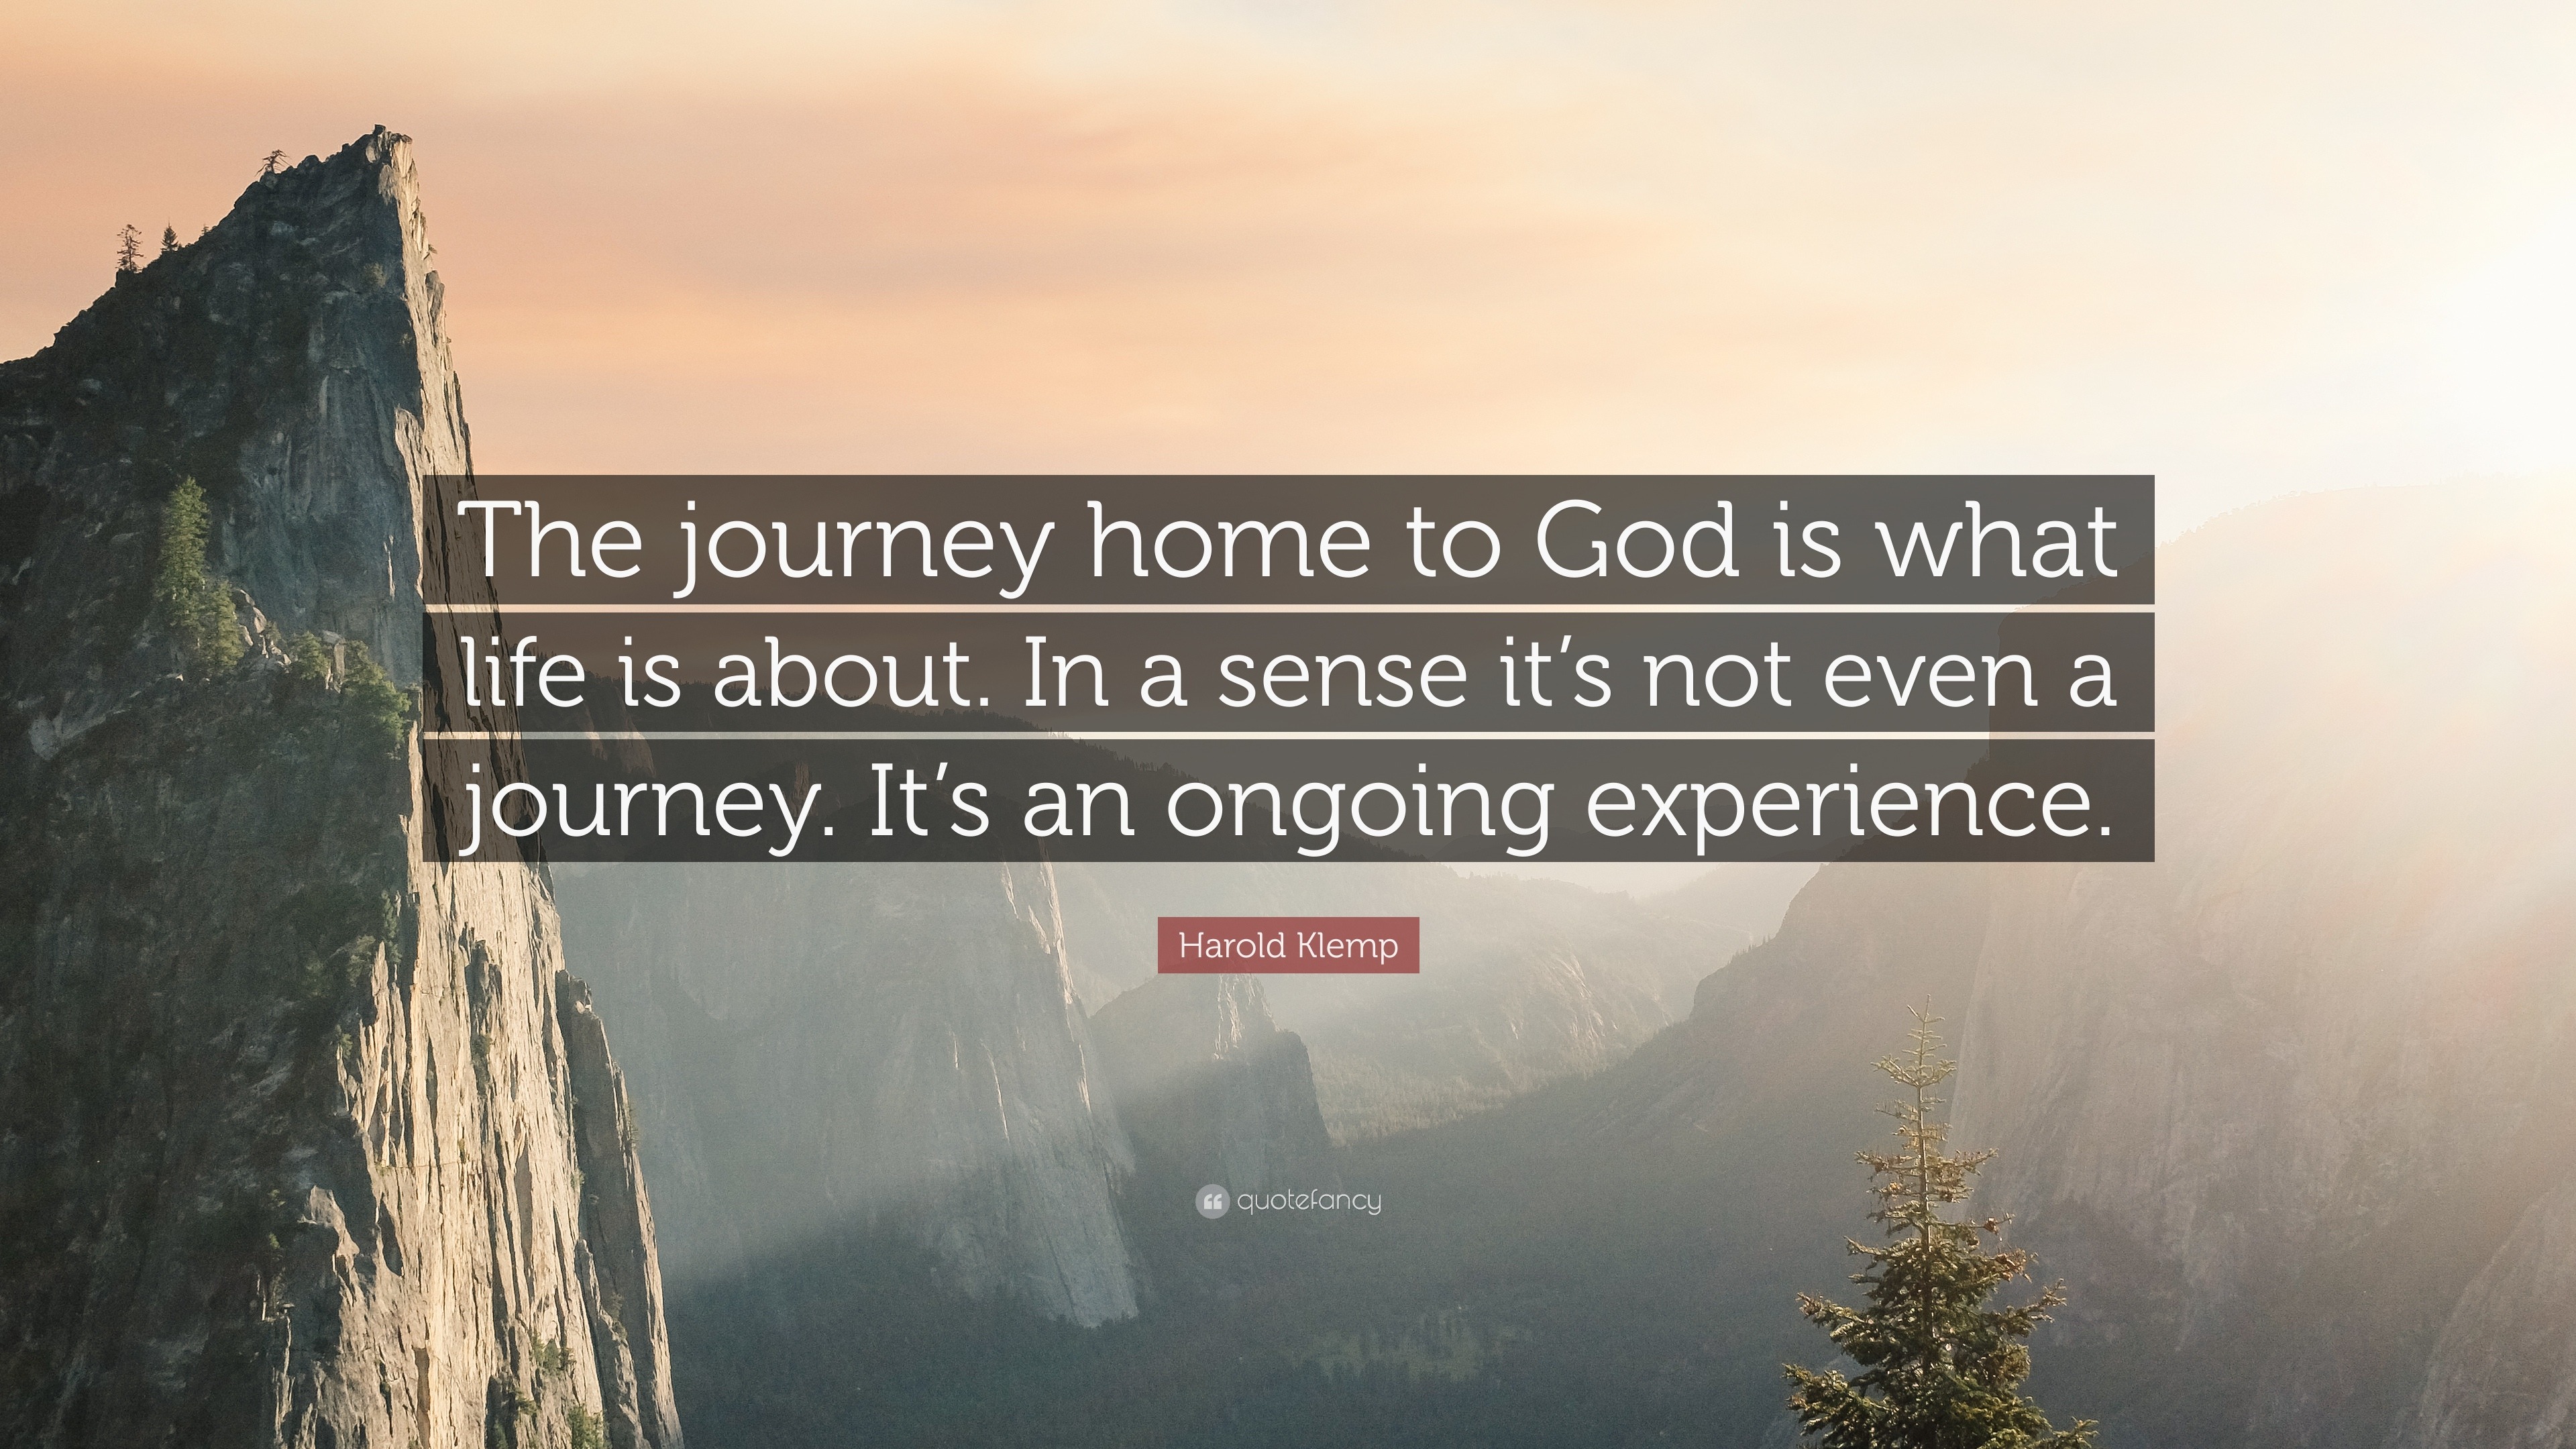 Harold Klemp Quote: “The journey home to God is what life is about. In ...